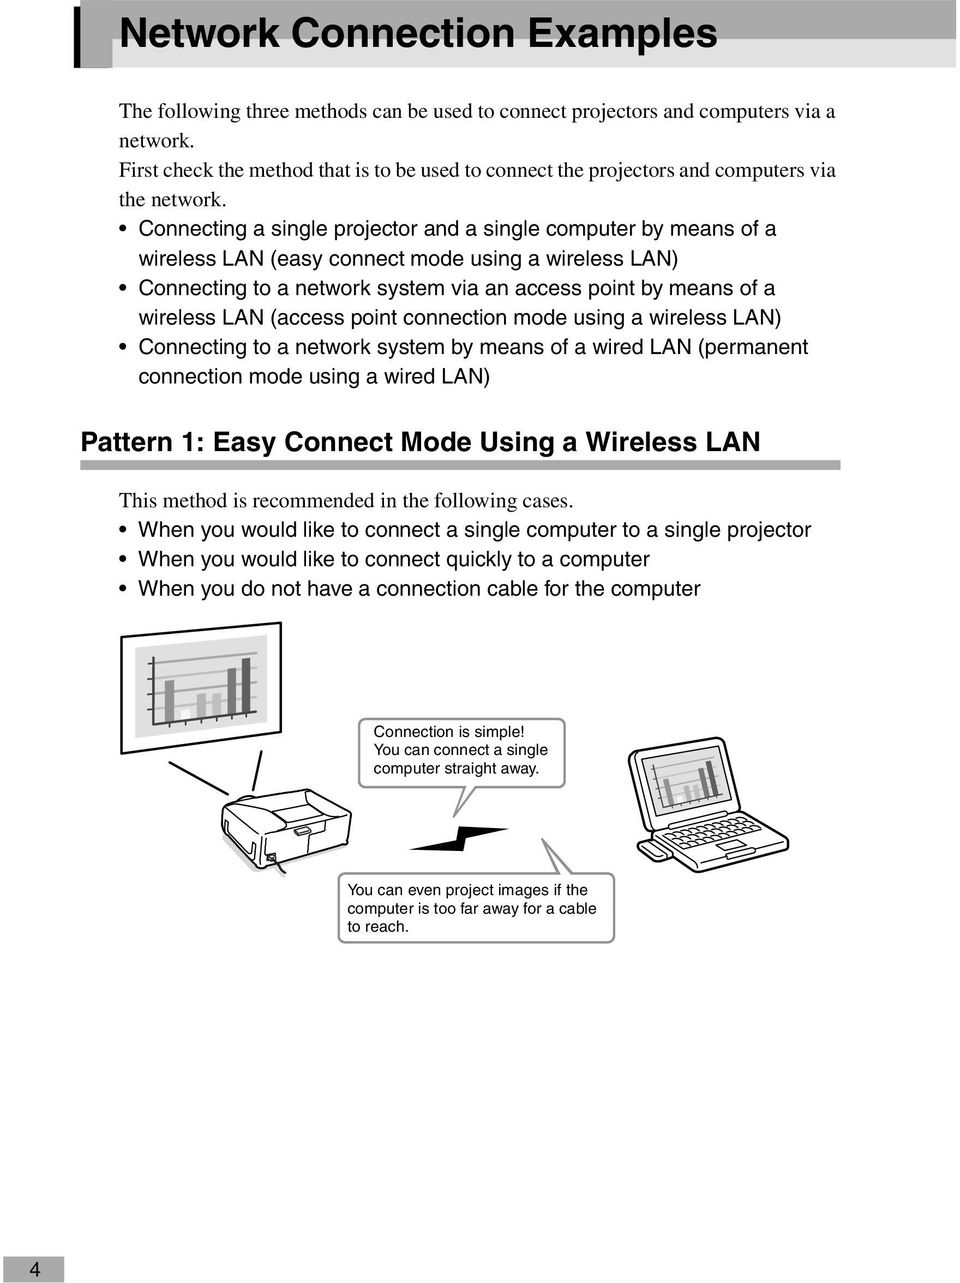 Connecting a single projector and a single computer by means of a wireless LAN (easy connect mode using a wireless LAN) Connecting to a network system via an access point by means of a wireless LAN